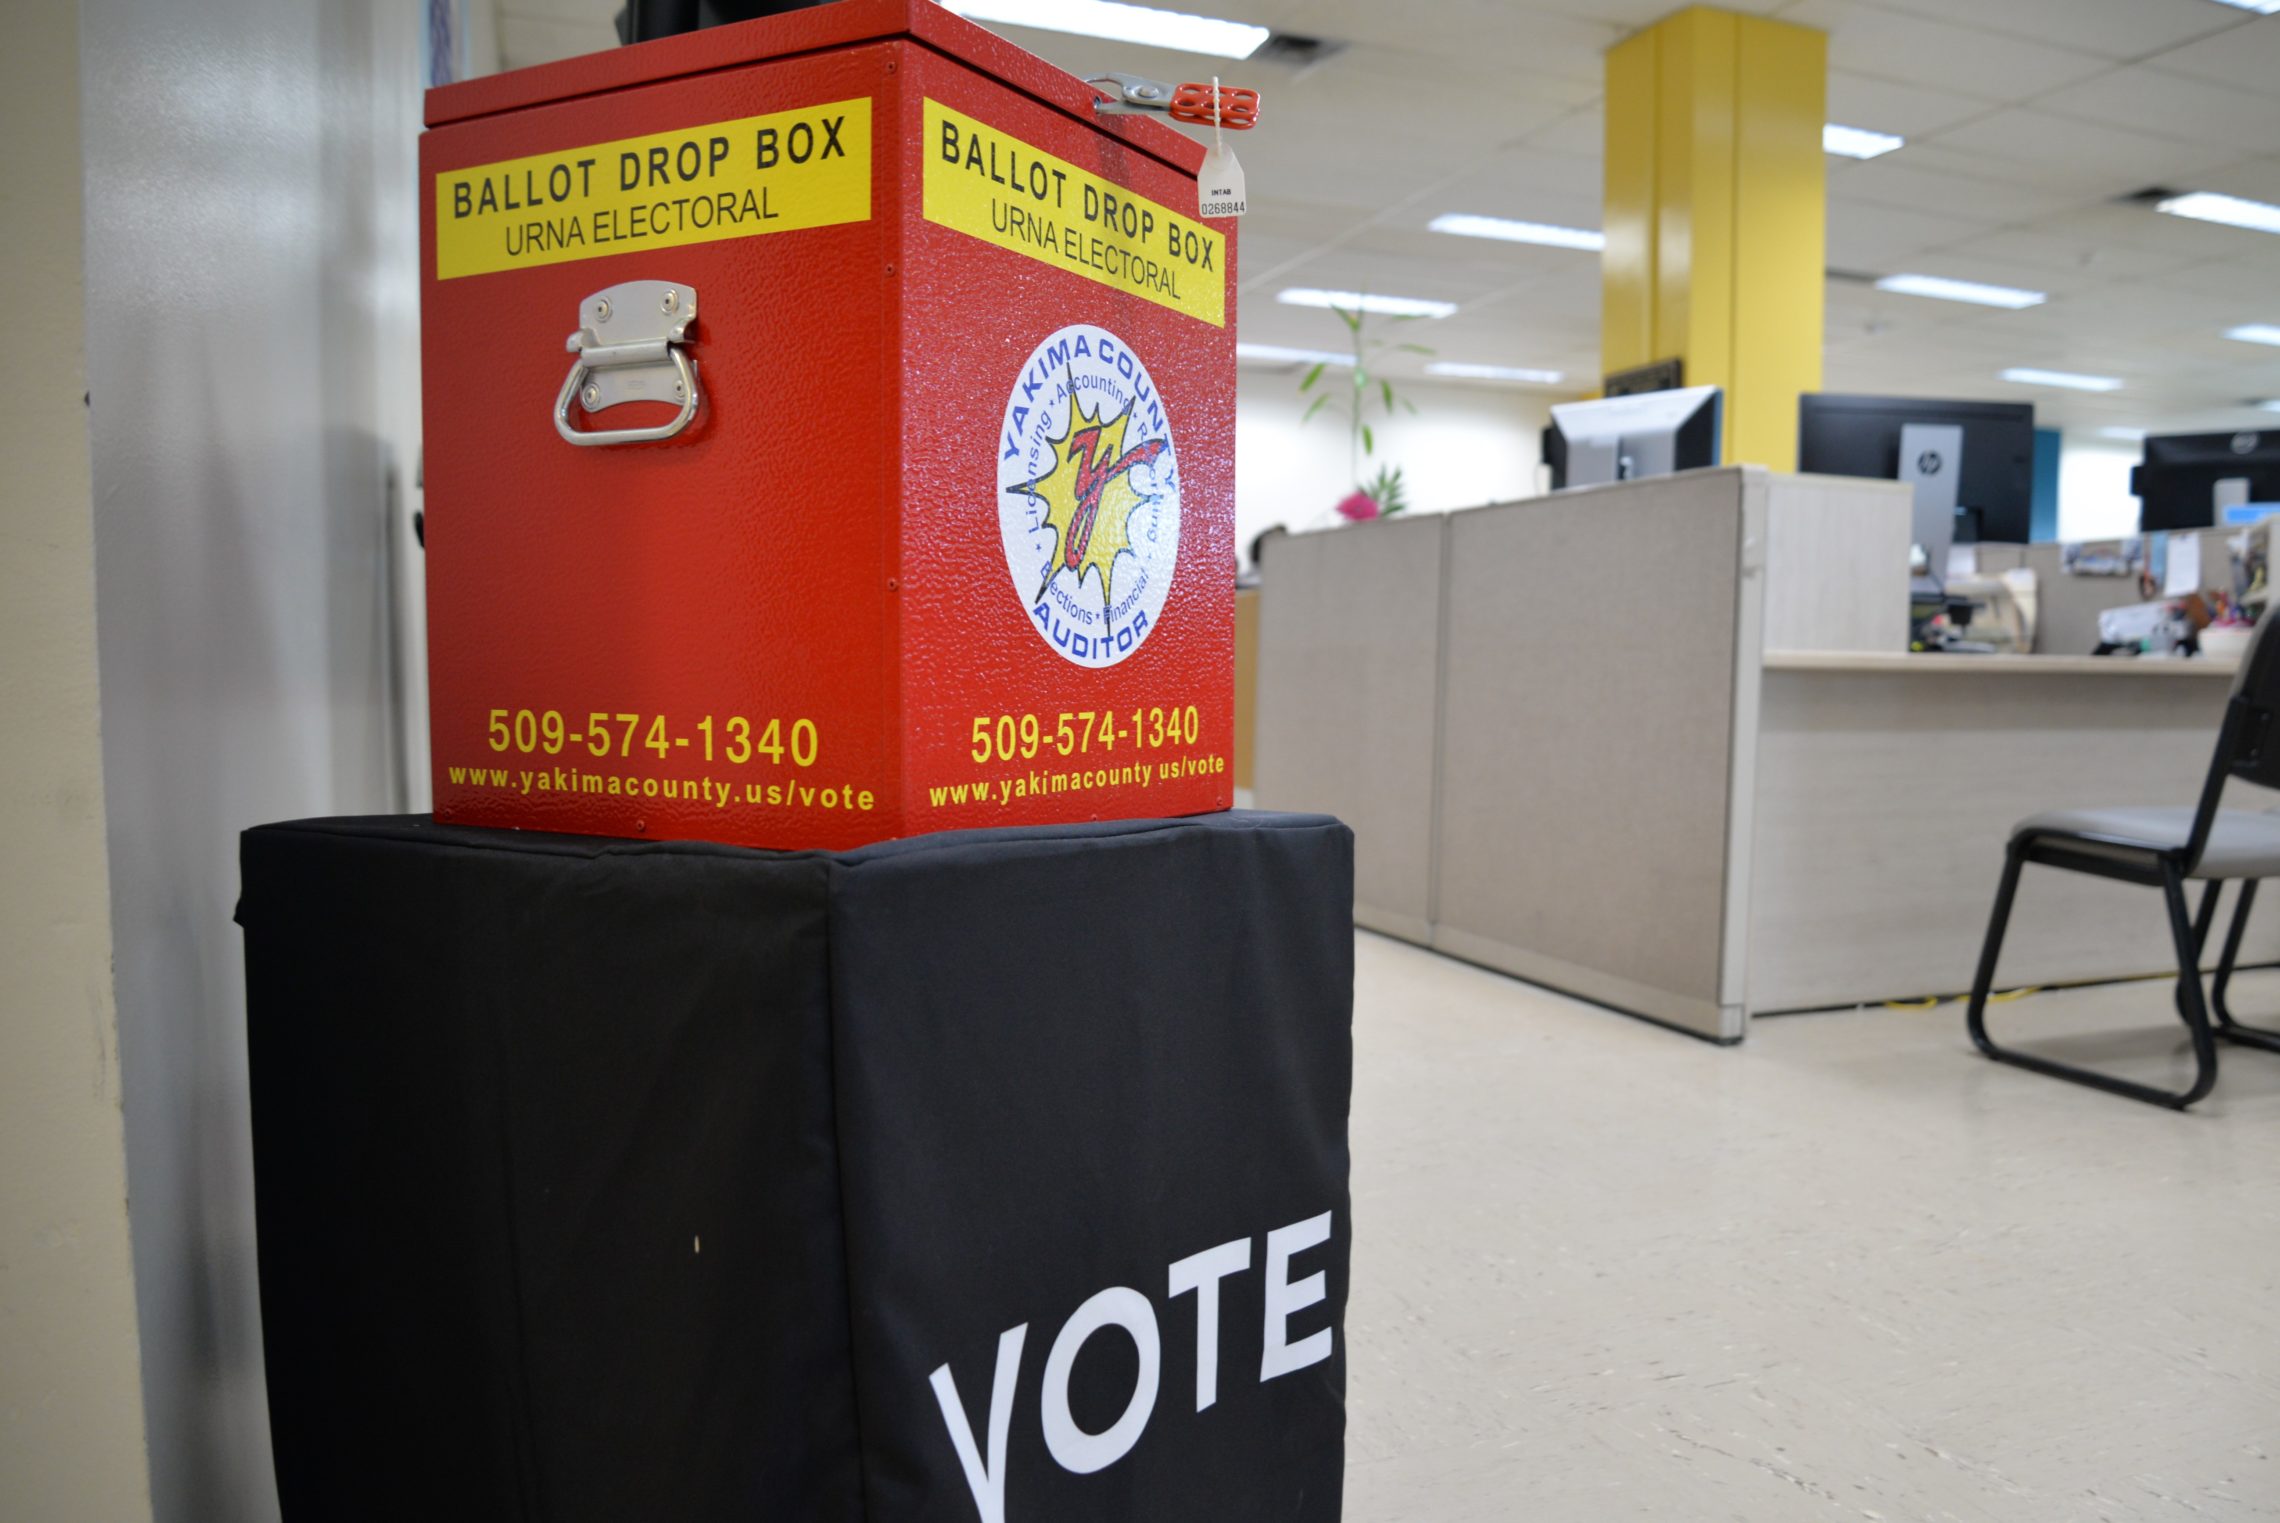 If Washington voters don't mail in ballots, they can return them in person to drop boxes like this one at the Yakima County Elections Office. CREDIT: ESMY JIMENEZ/NWPB